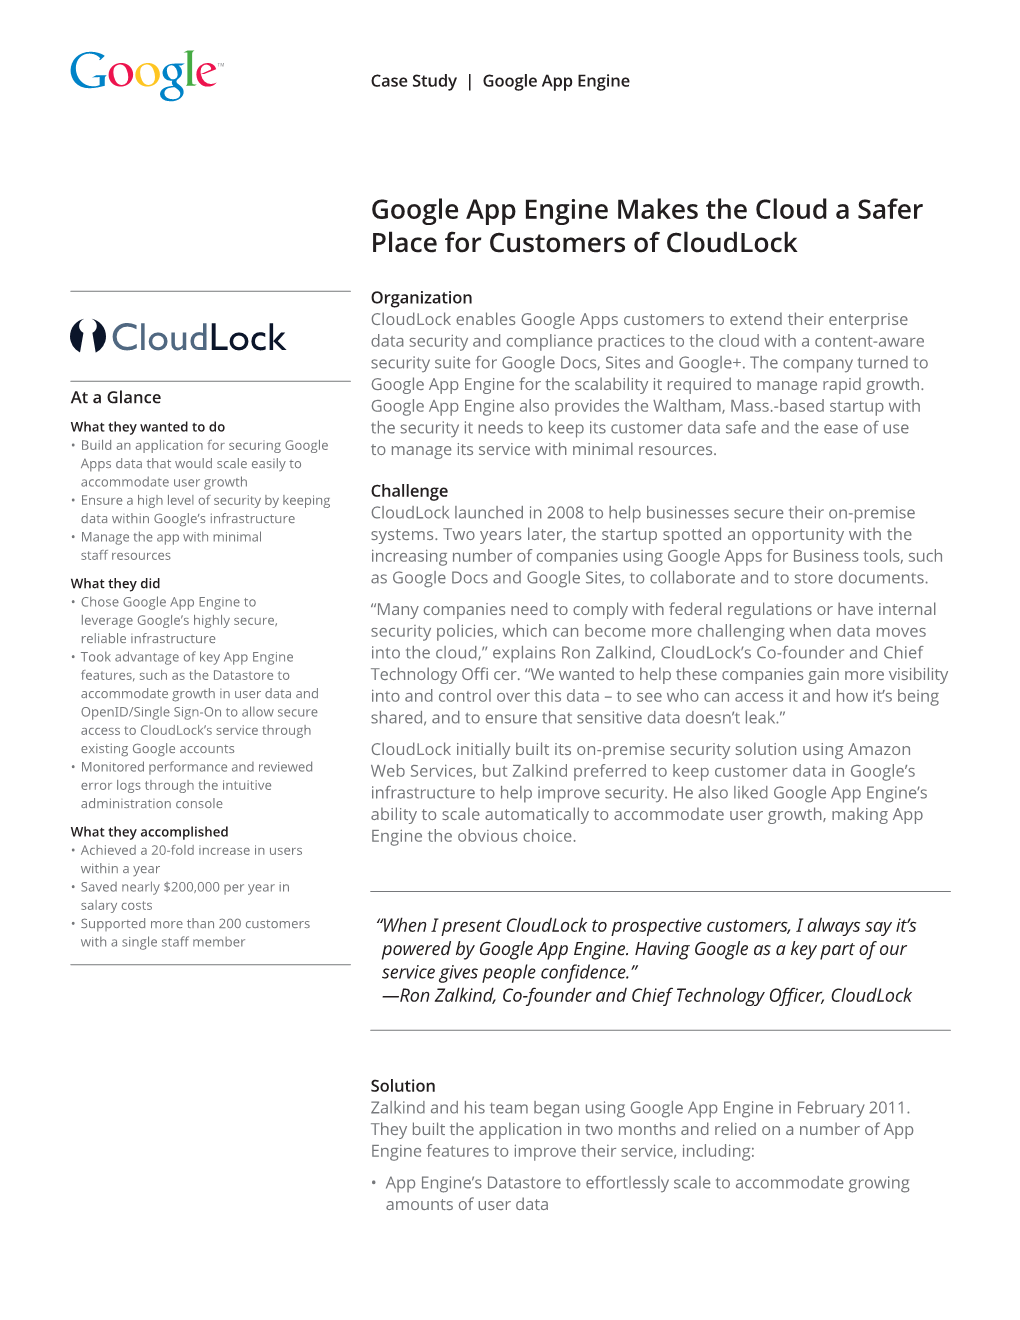 Google App Engine Makes the Cloud a Safer Place for Customers of Cloudlock